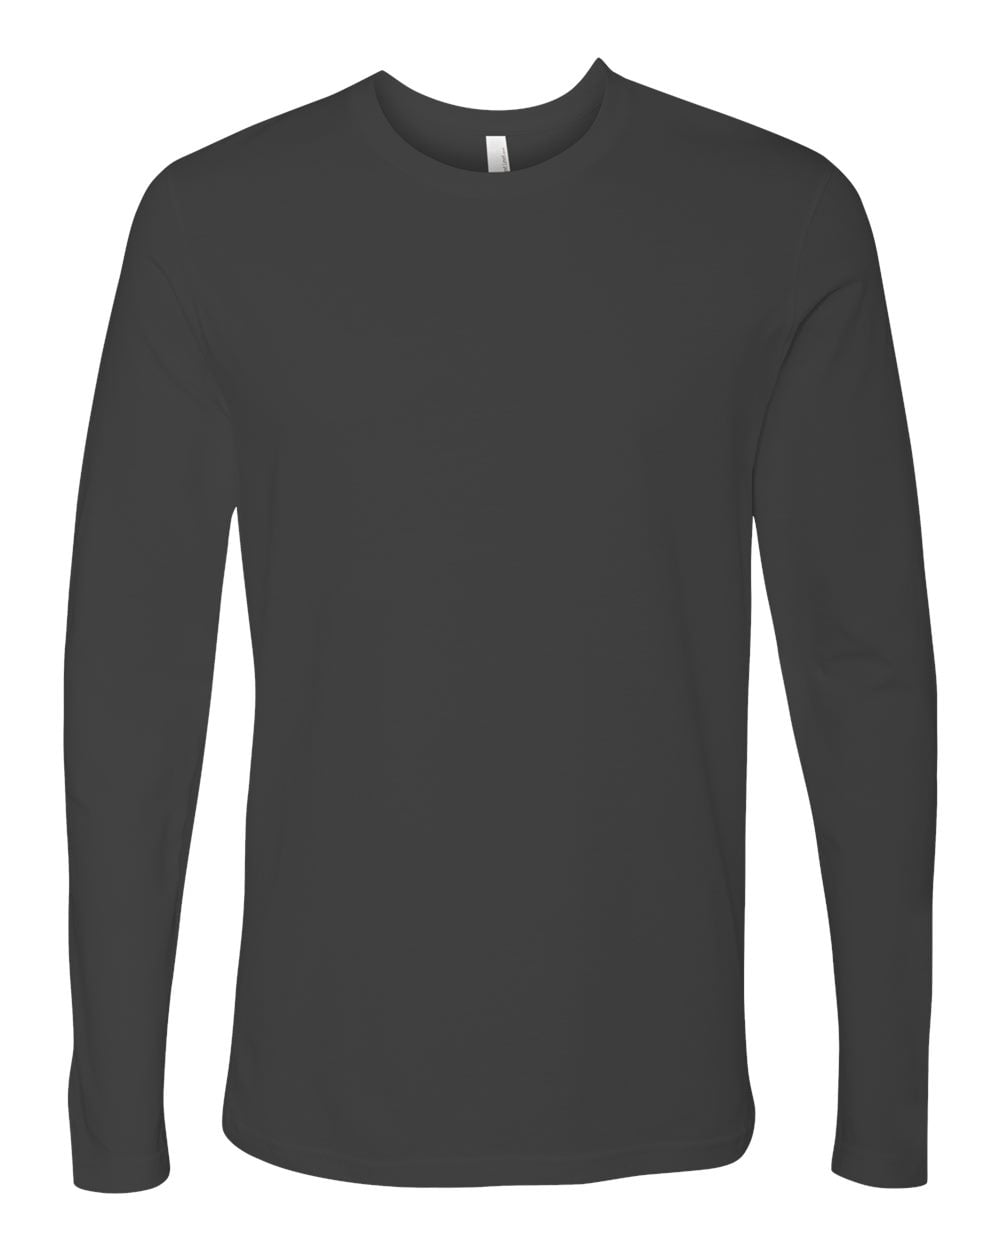 Next Level Mens Premium Fitted Long-Sleeve Crew N3601-Black 6 Pack 